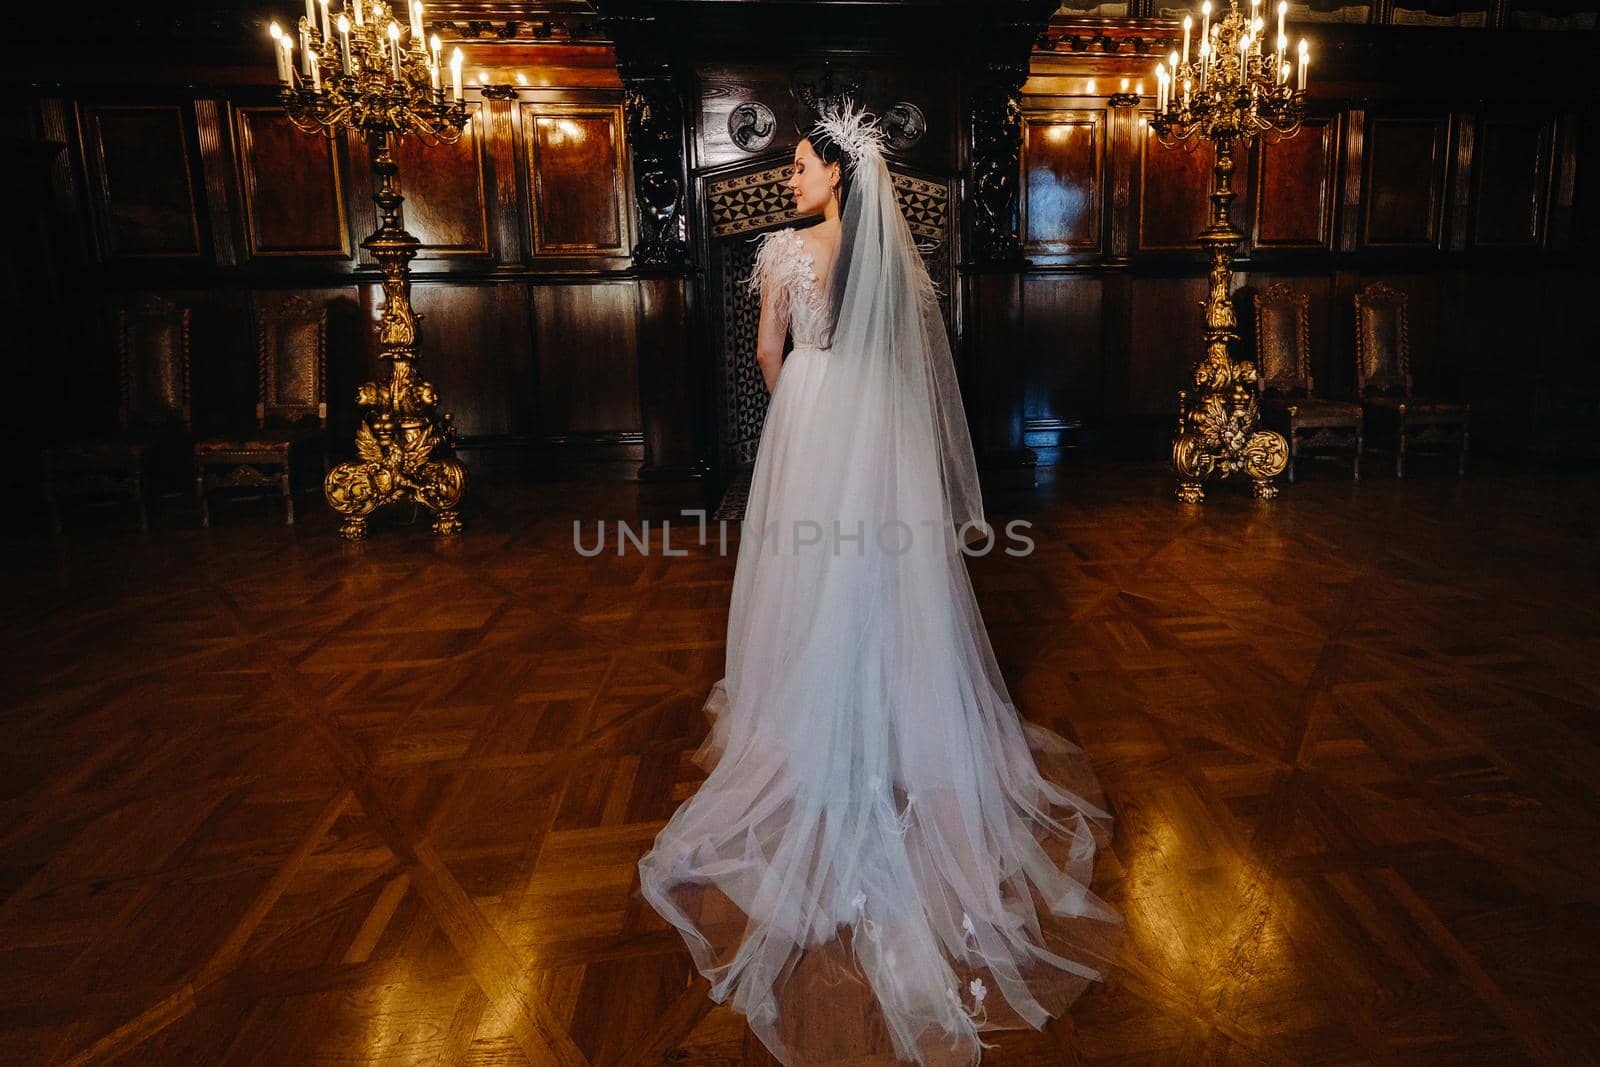 A bride in a wedding dress stands with her back in the ancient interior of the castle.